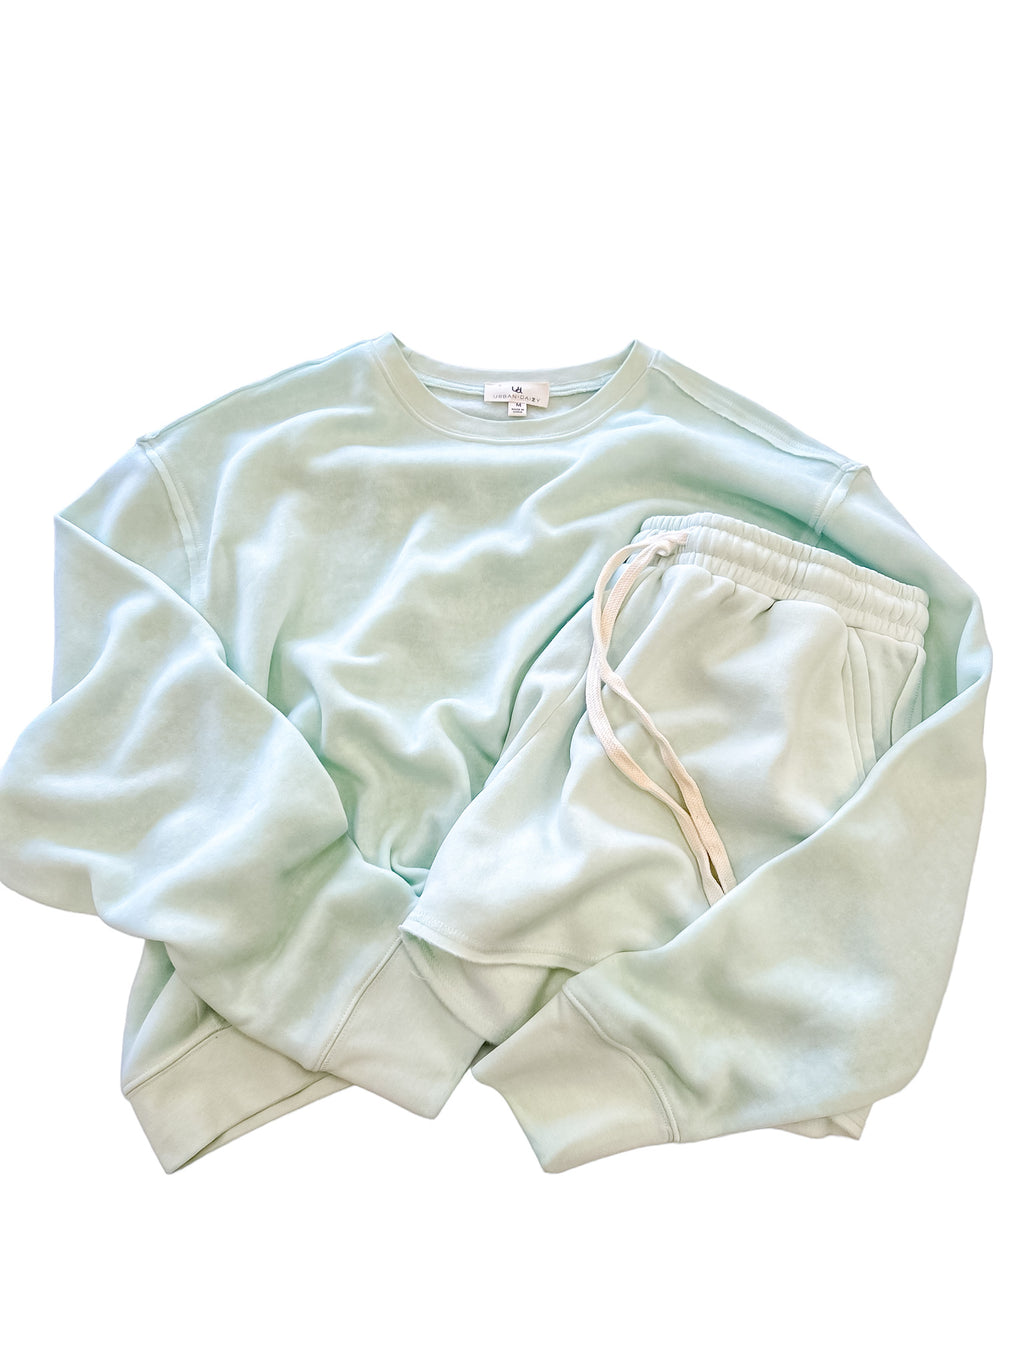 Mint Molly Sweatshirt and Short Set with crew neckline, ribbed cuffs, elastic waistline, pockets and frayed hem, perfect for stylish and comfortable lounge wear.